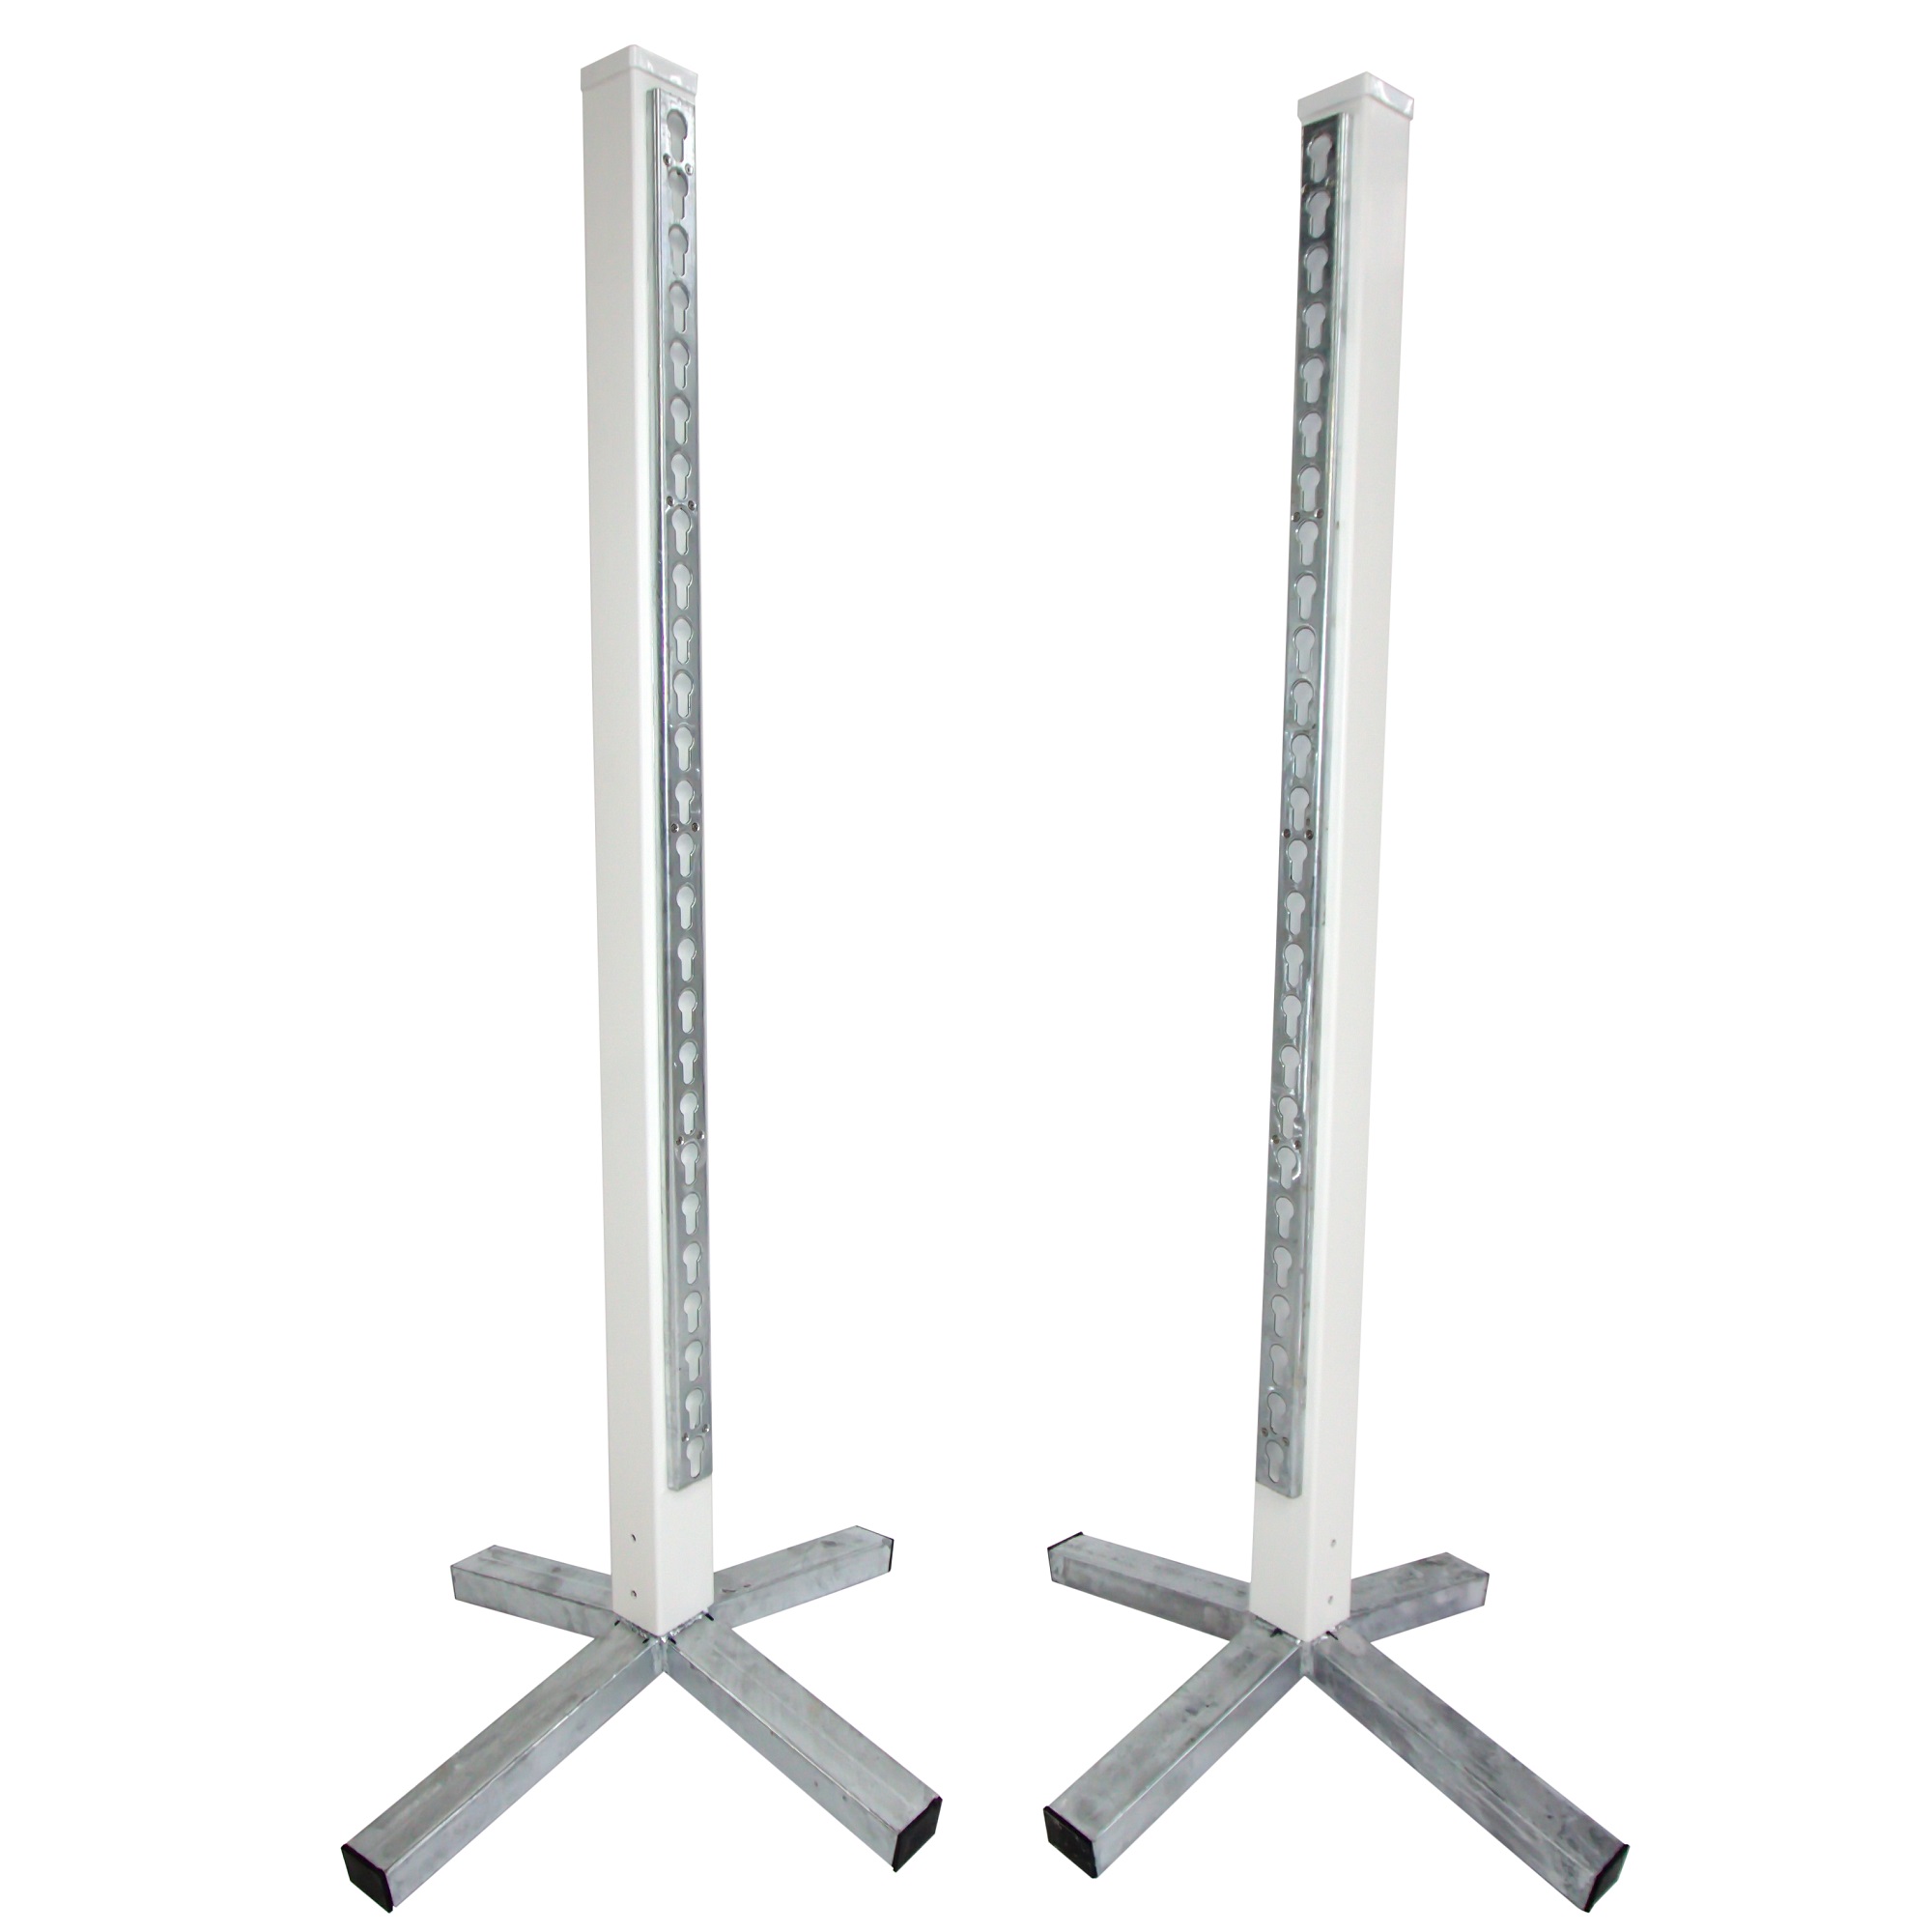 2 x 1.65m Showjump Stands With Metal Keyhole Tracks - Red, White & Blue